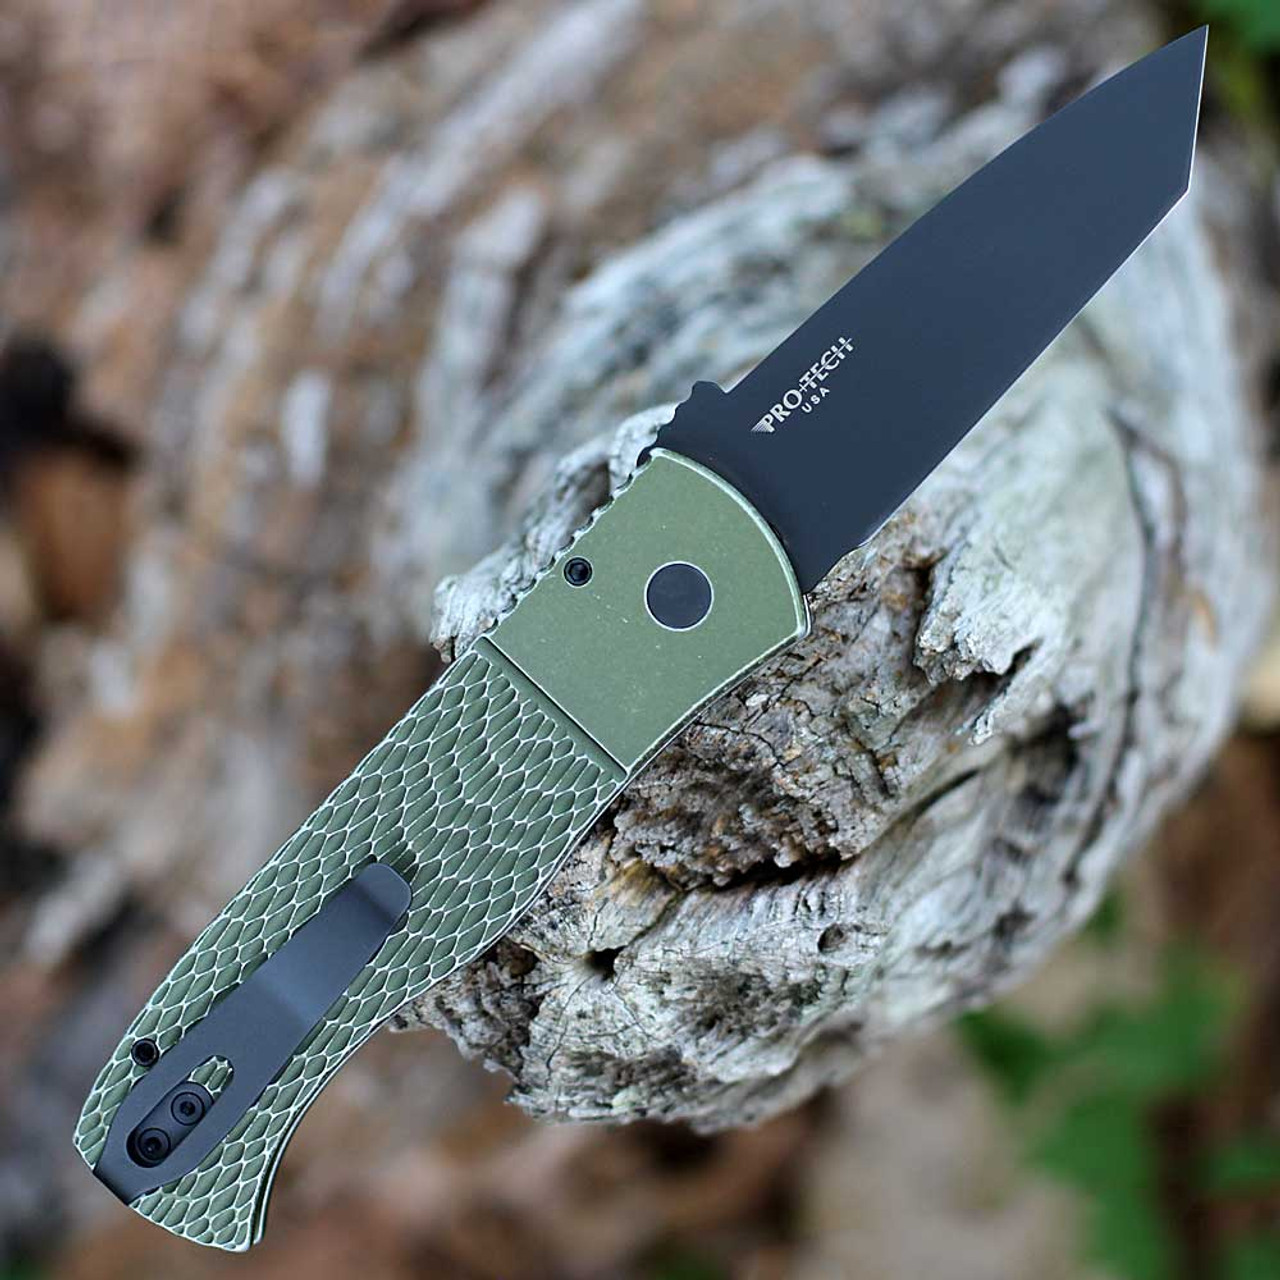 Pro-Tech Emerson CQC-7 (E7T15-BW Green) 3.25" 154CM Two Toned DLC Coated and Satin Tanto Plain Blade, Green "Battle Worn" Aluminum Handle